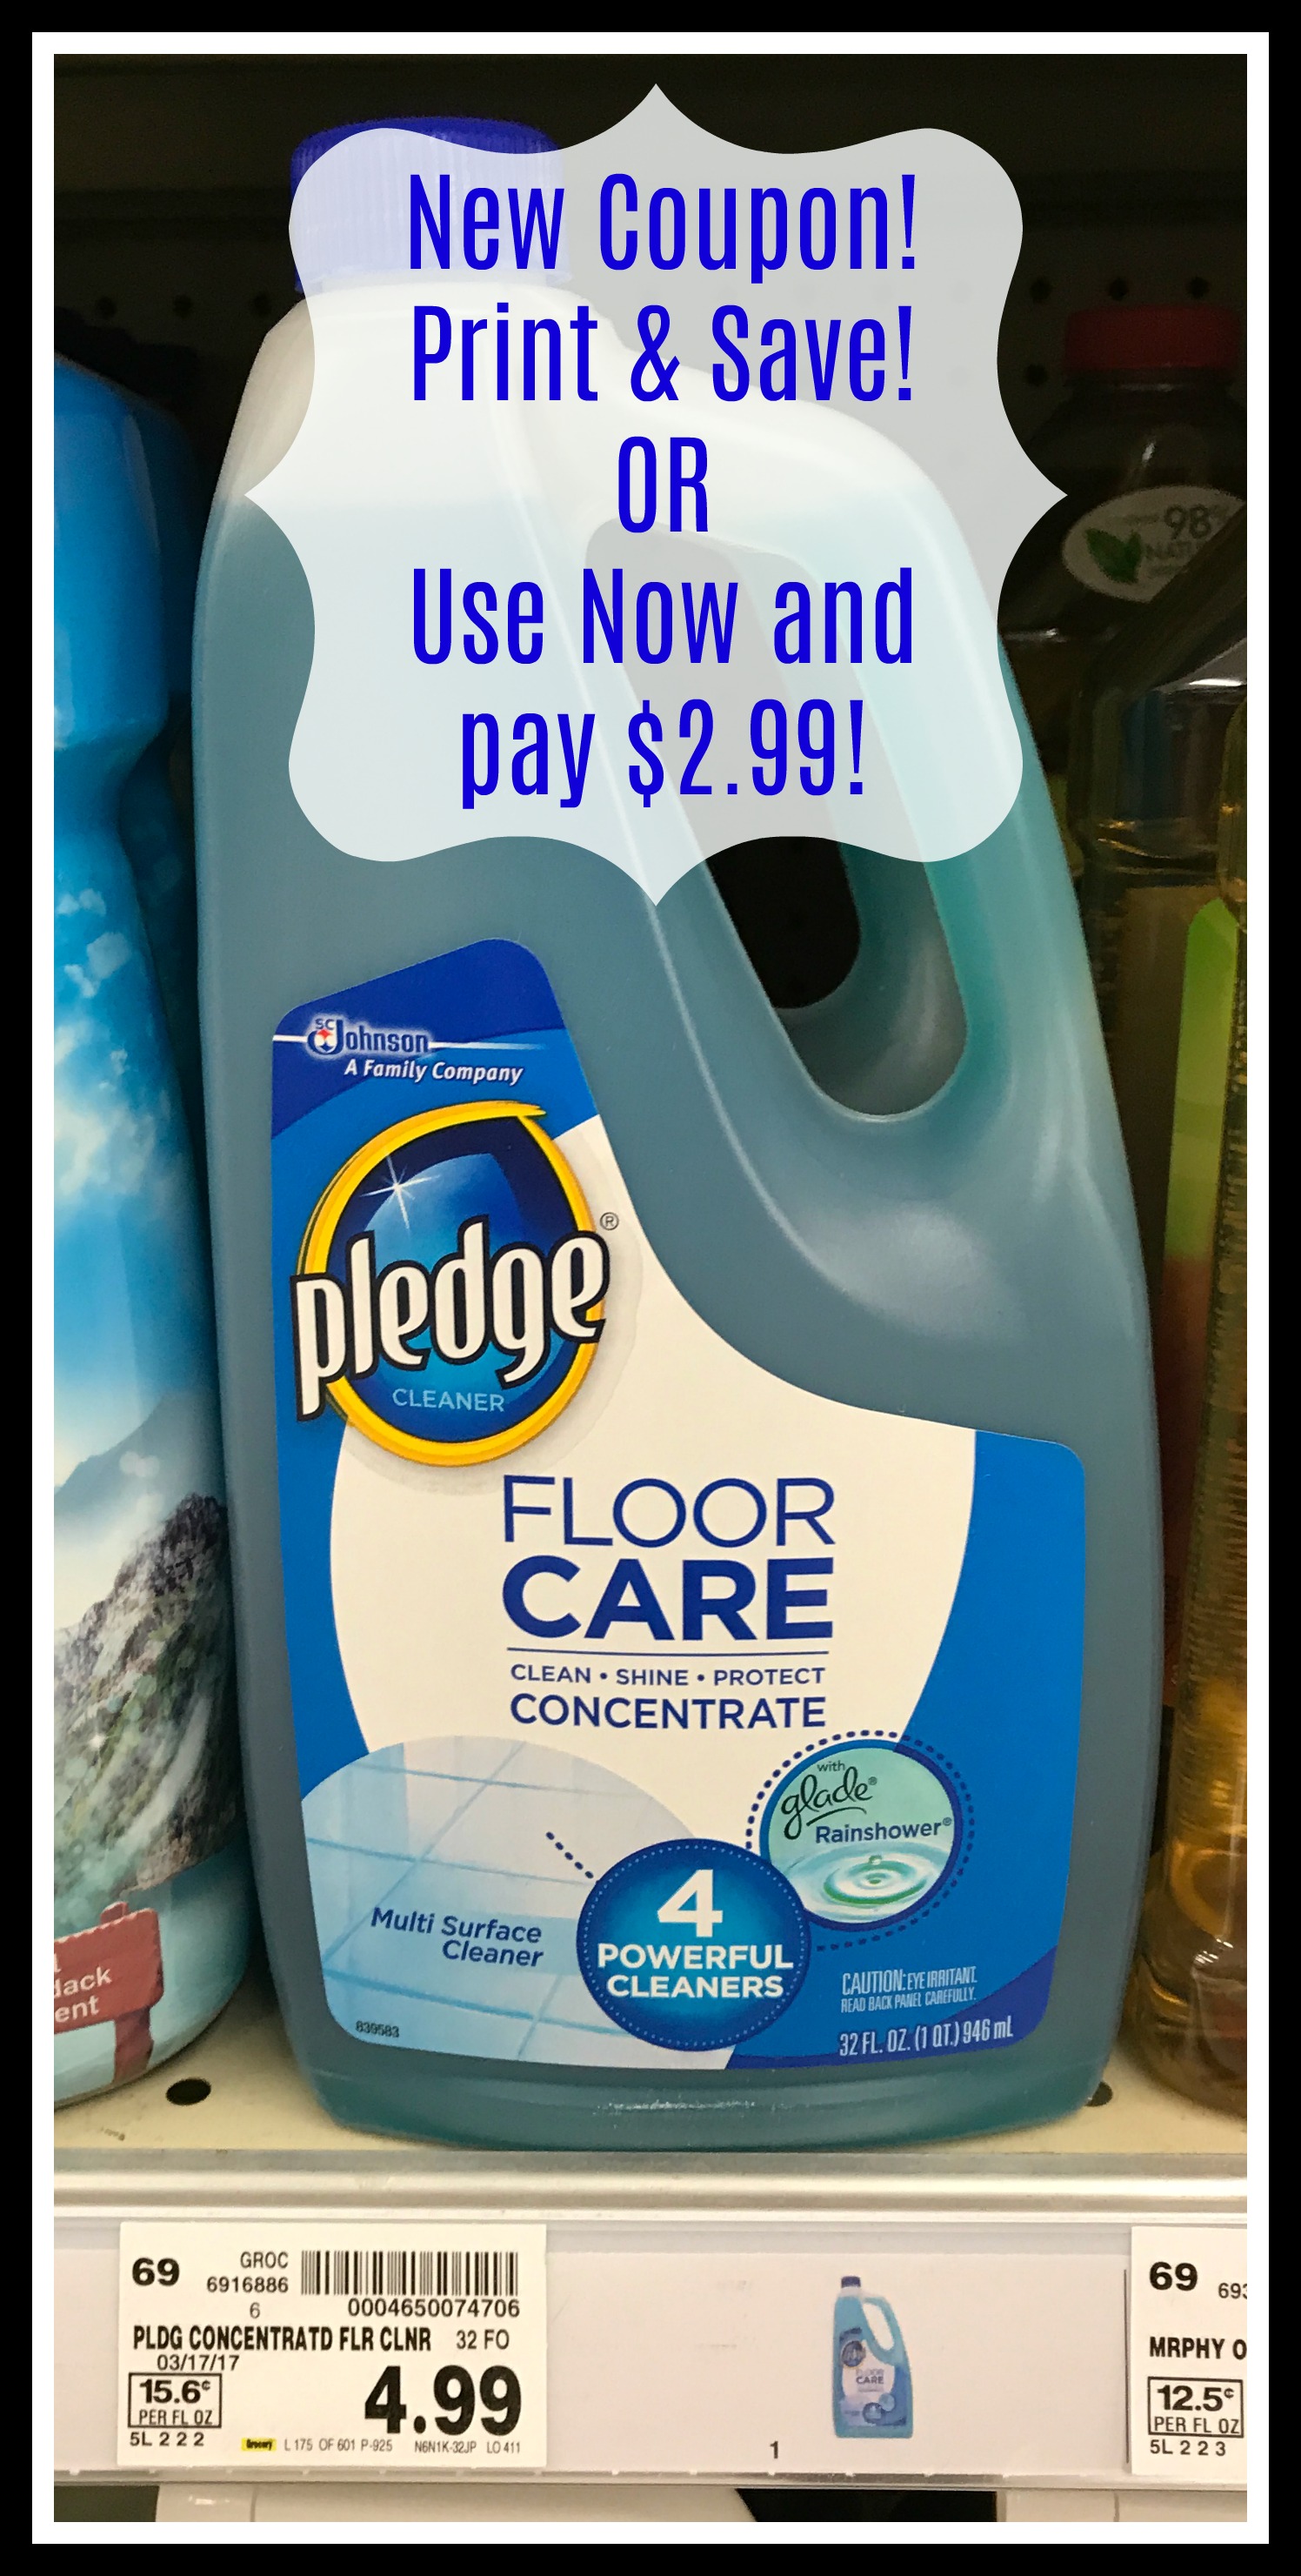 Print Save Pledge Floor Care Coupon For Kroger Sale Use Now